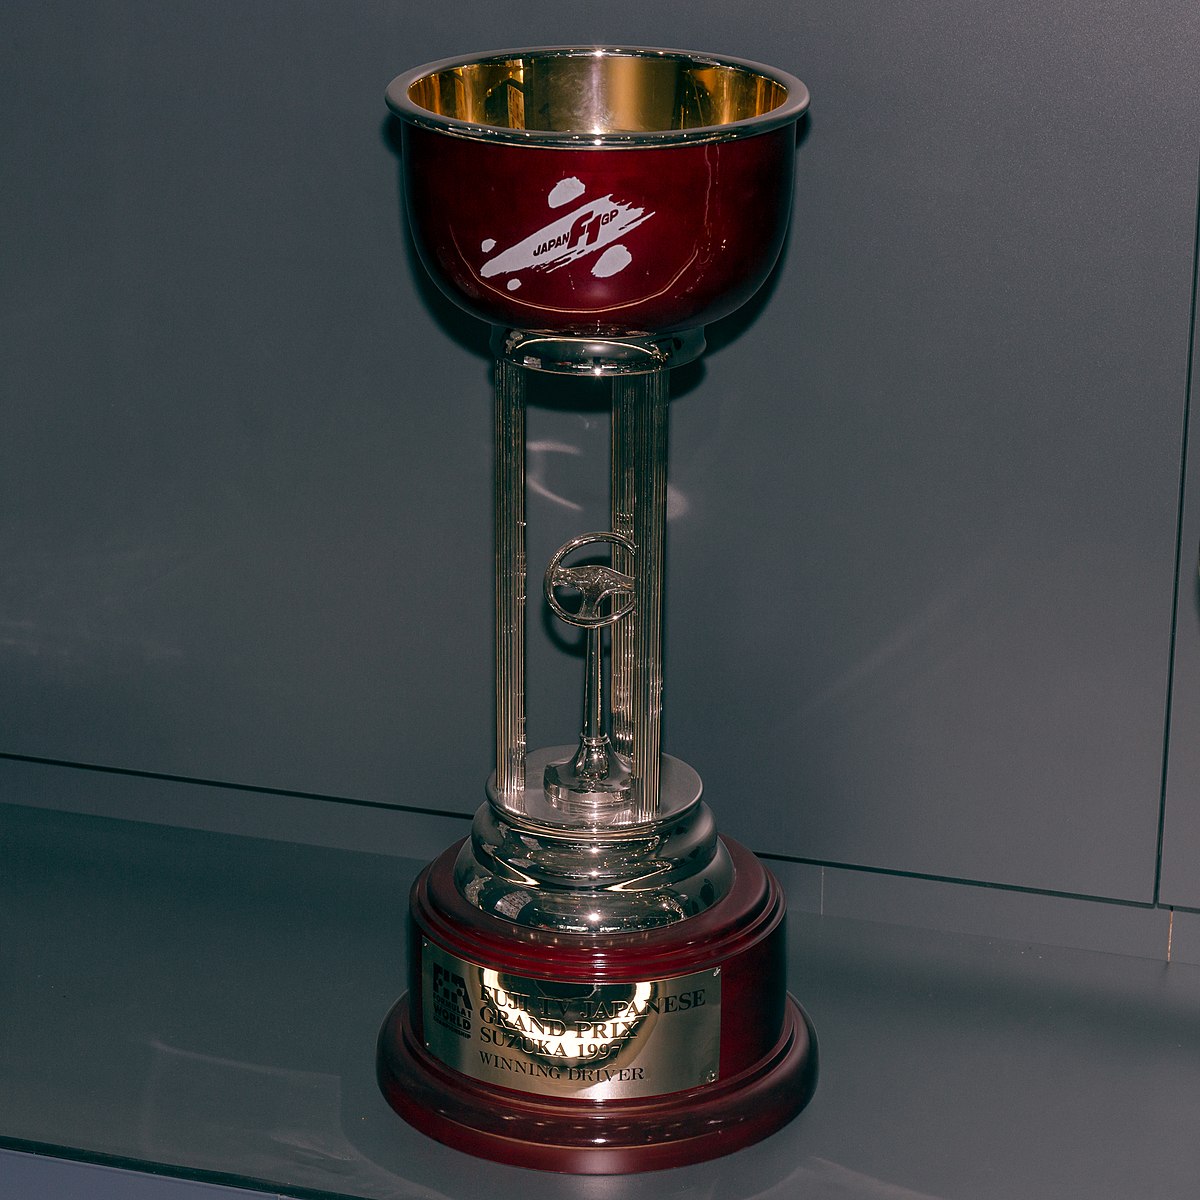 Japanese Grand Prix trophy will be activated with winner's kiss